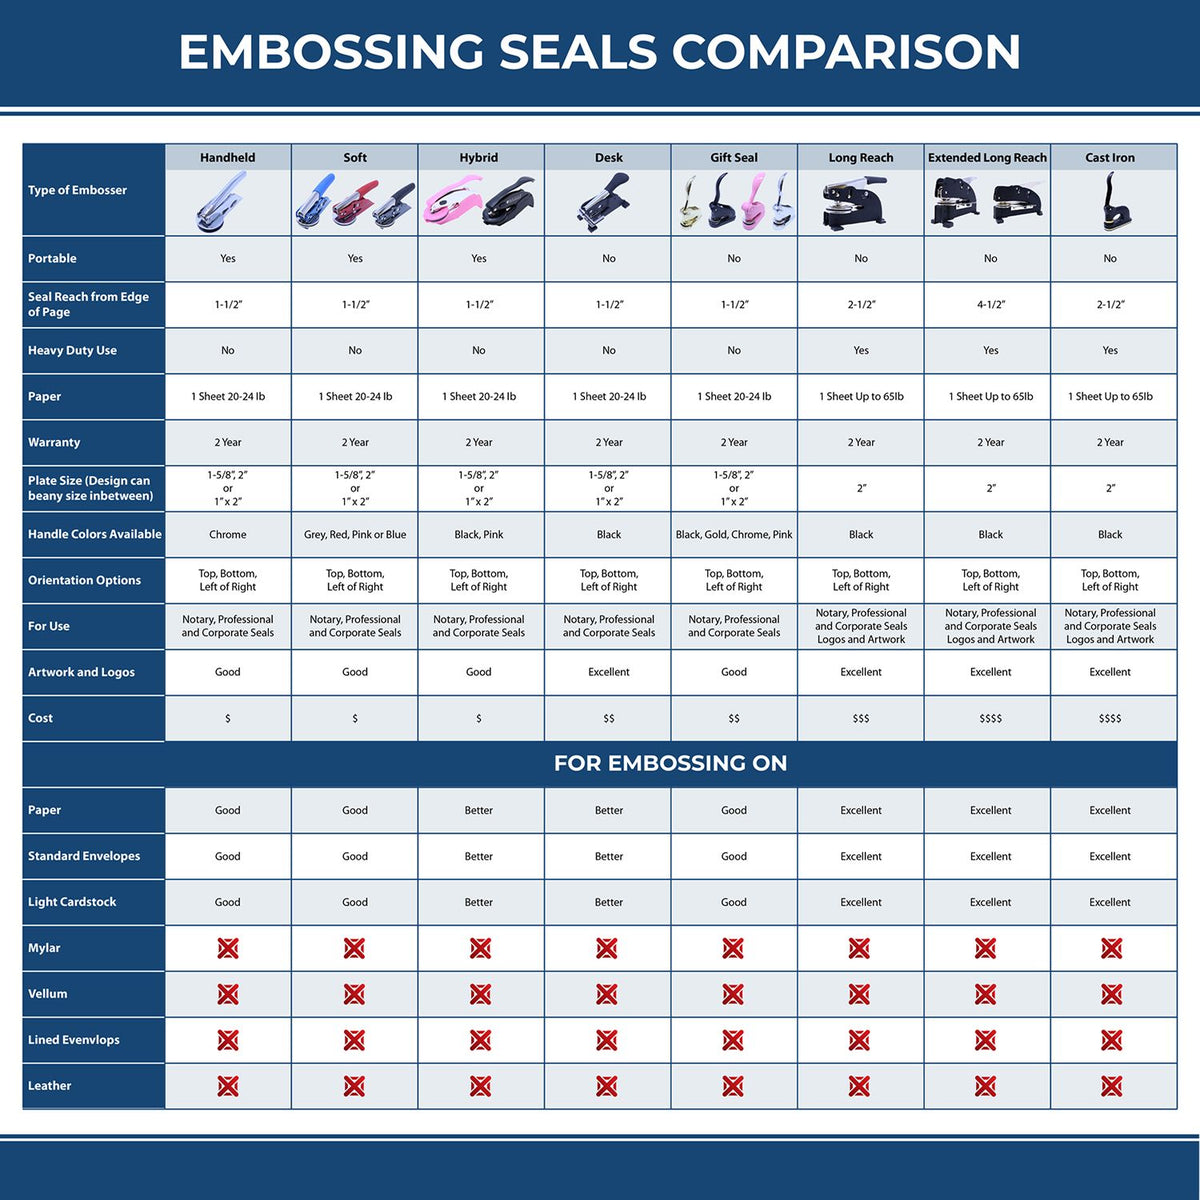 A comparison chart for the different types of mount models available for the Heavy Duty Cast Iron Arizona Geologist Seal Embosser